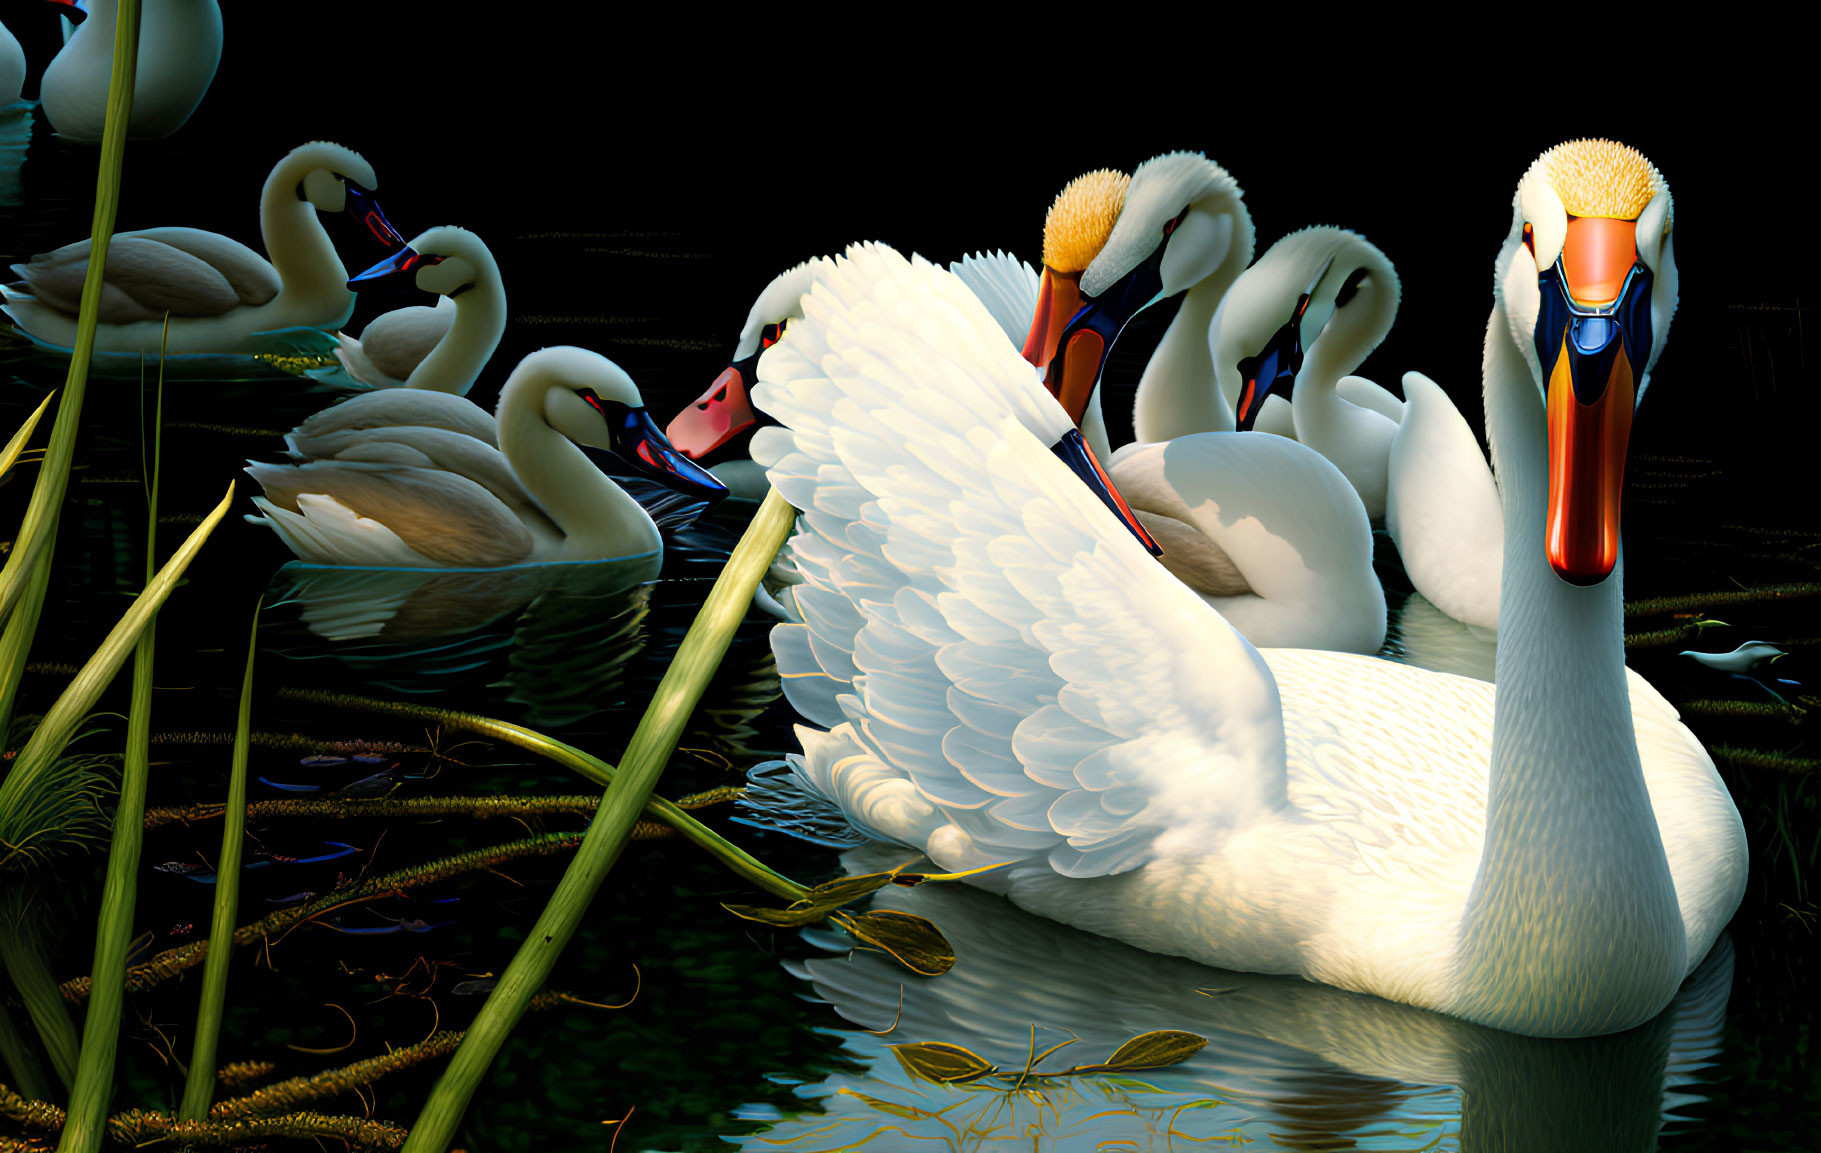 Graceful swans with intricate feathers in serene water with reeds.